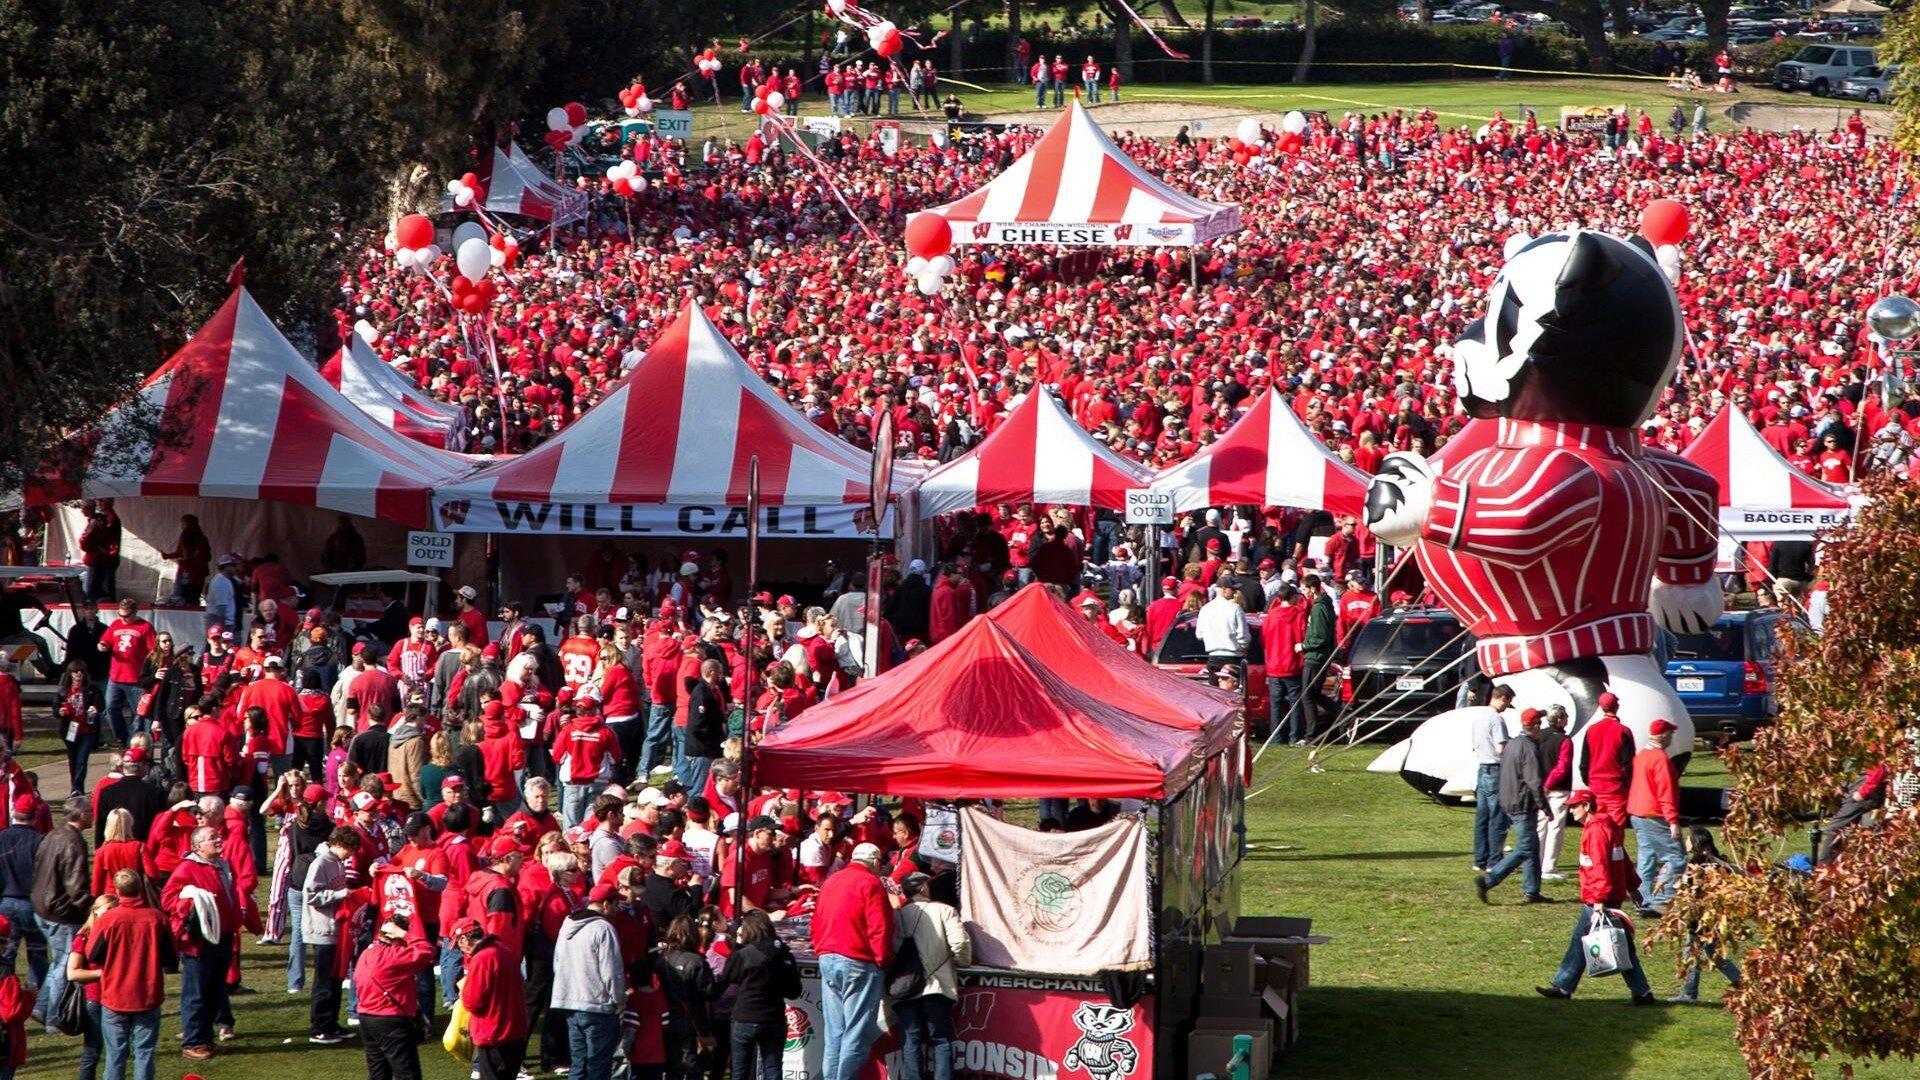 Mayors of most Big Ten towns ask conference to help stop tailgating | Wisconsin | thecentersquare.com